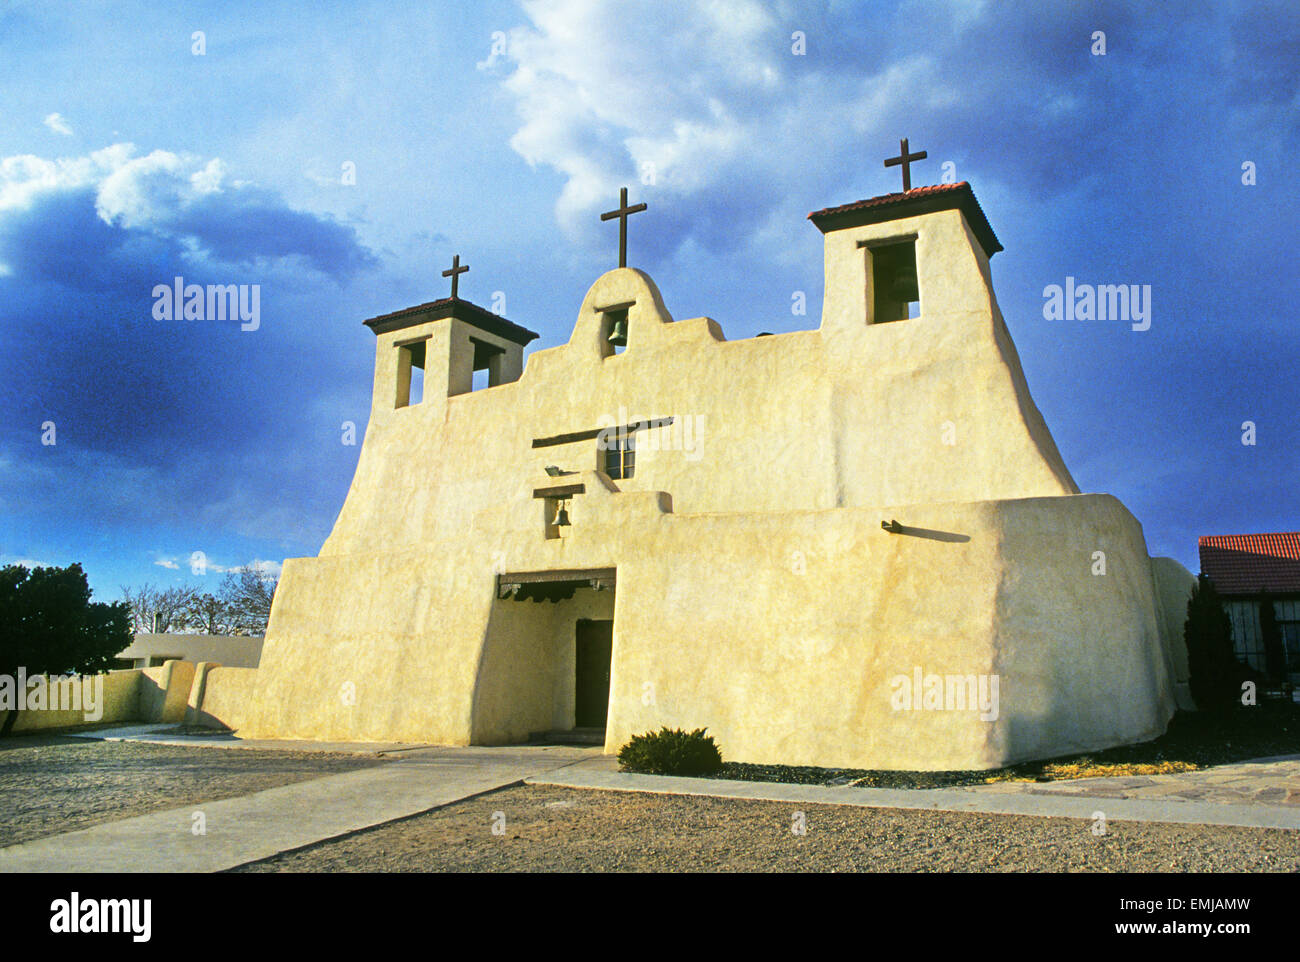 The San Agustin de la Isleta Mission at Isleta Indian Pueblo in central New Mexico was constructed around 1710, after another, older church on the same spot was destroyed. Stock Photo